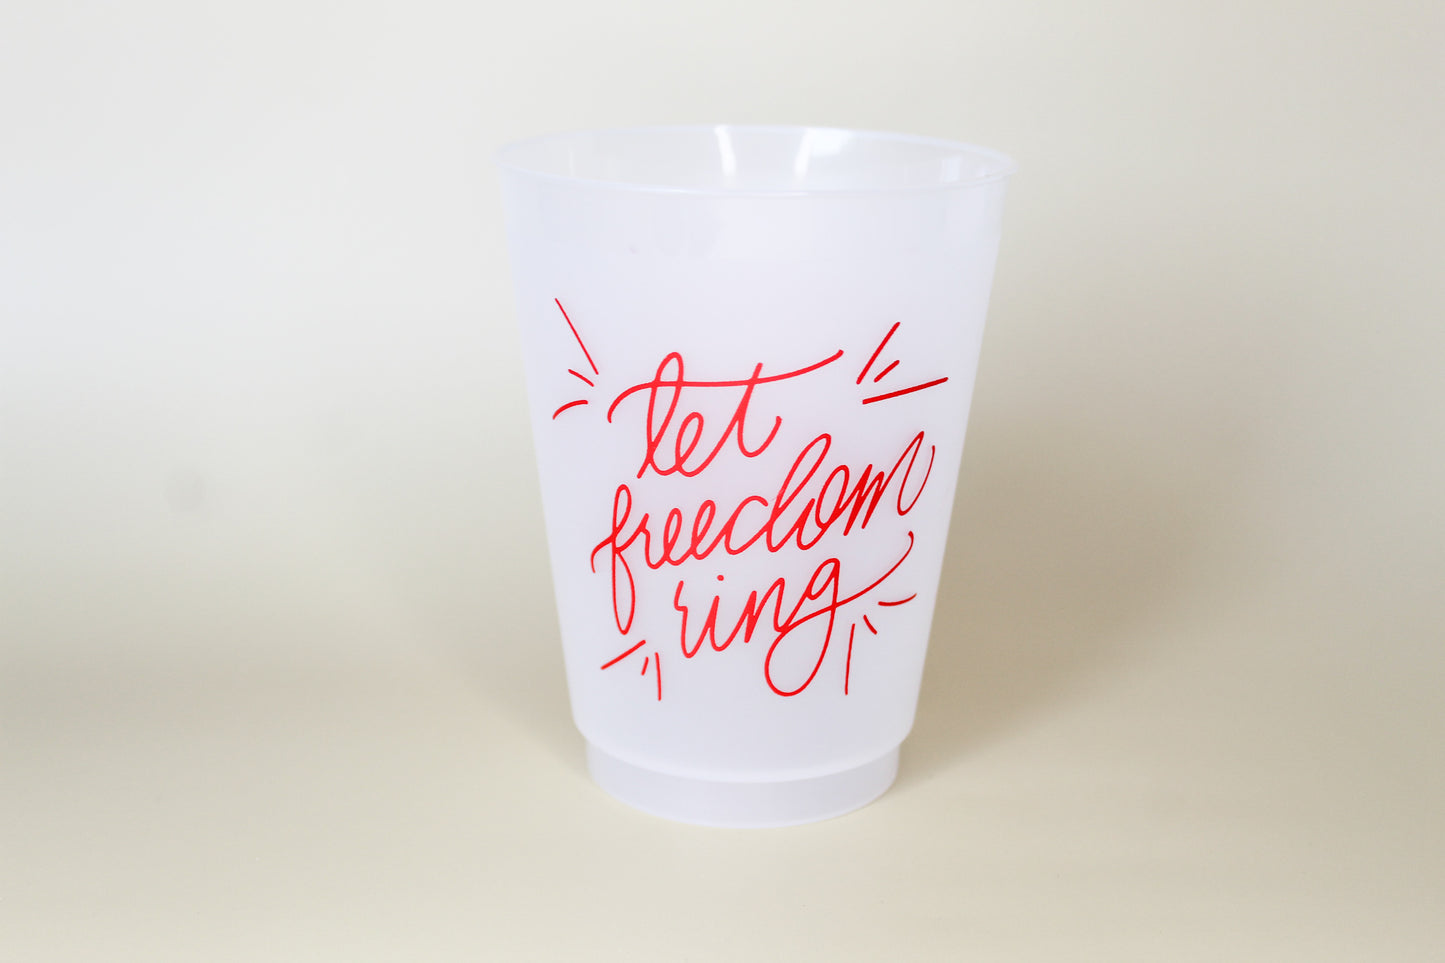 These cups are perfect for your Fourth of July or Memorial Day parties! Best of all, you can use these time and time again - they're dishwasher safe!  These patriotic cups come in a cellophane sleeve with a black and white striped ribbon tied in a bow at the top. 